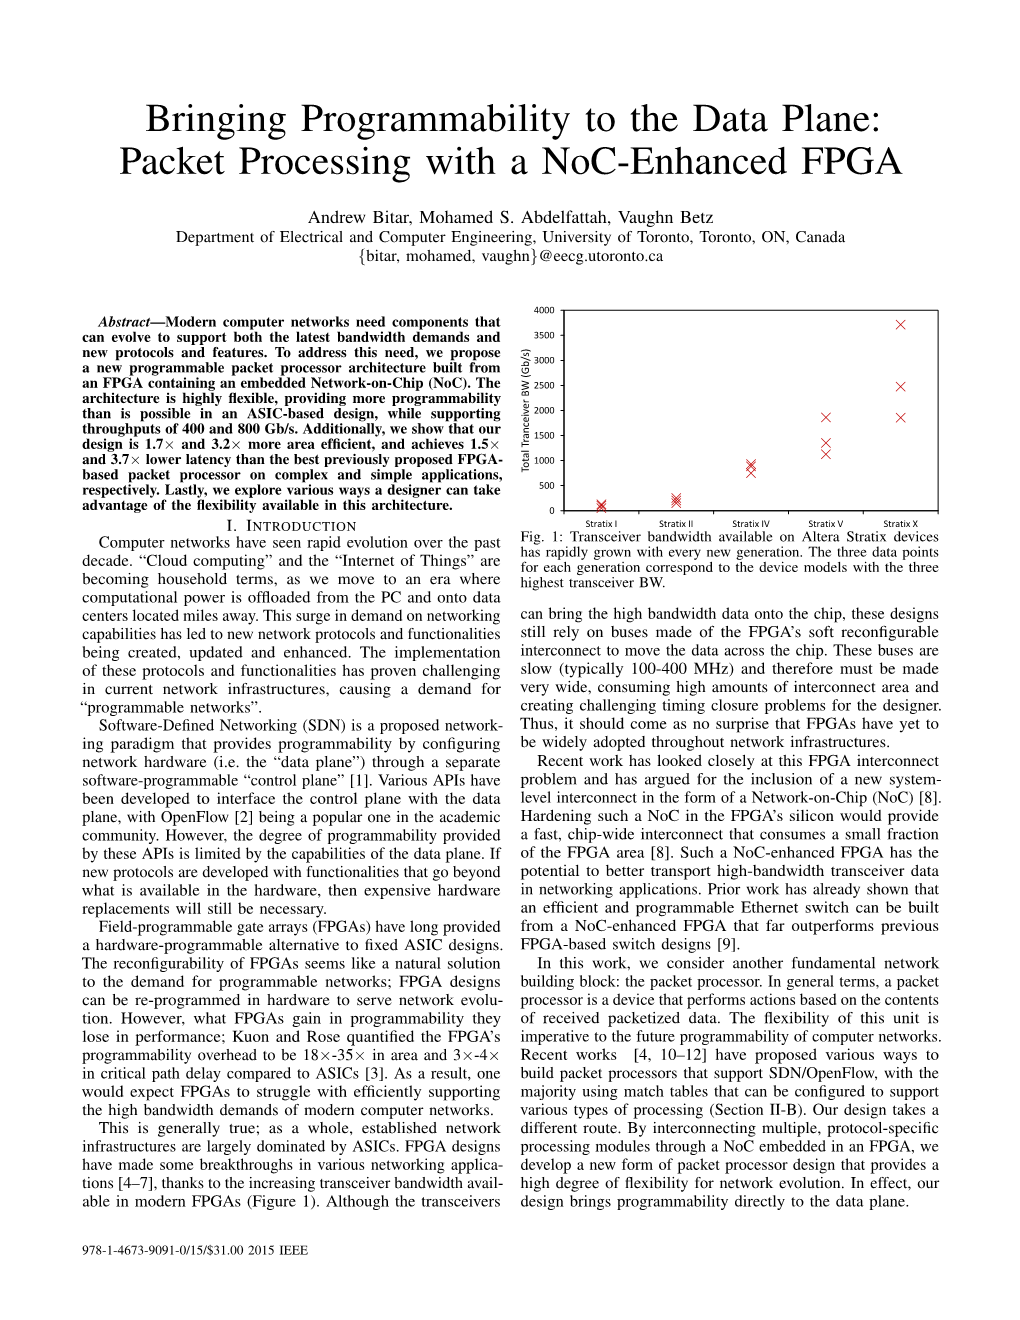 Packet Processing with a Noc-Enhanced FPGA